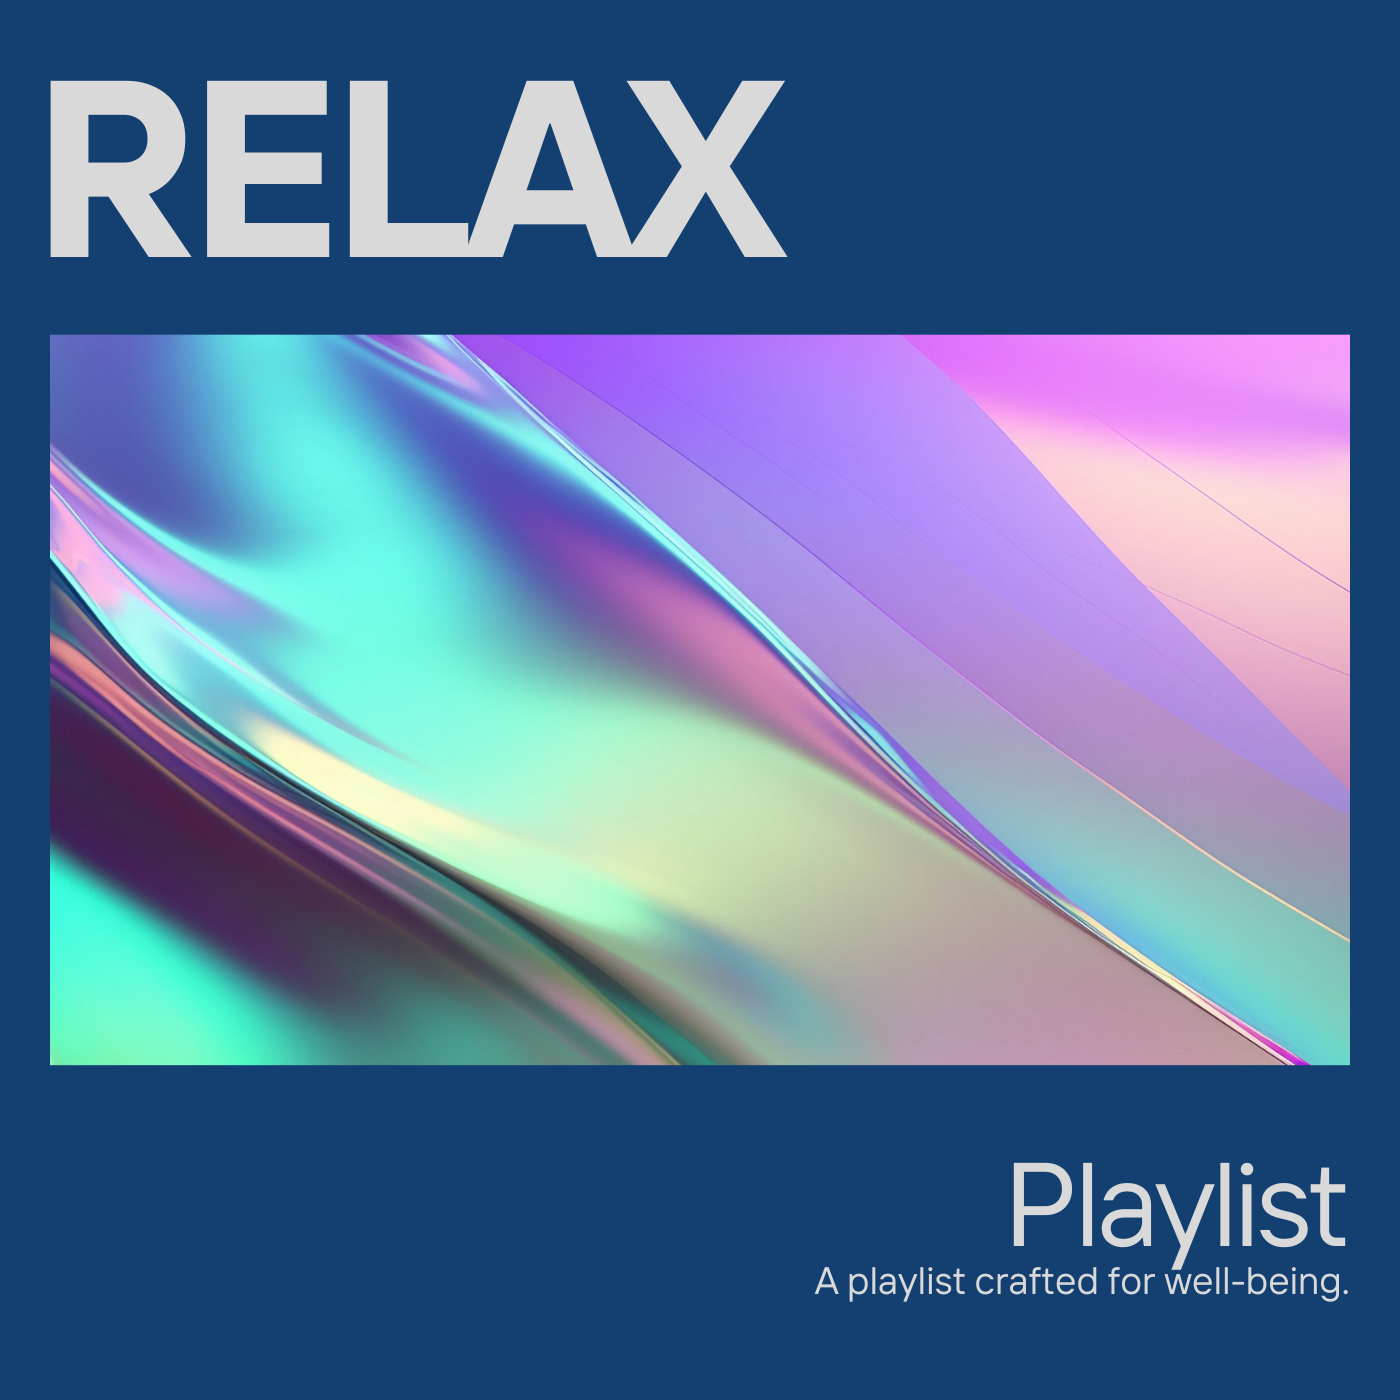 Relax - The Playlist for Relaxation